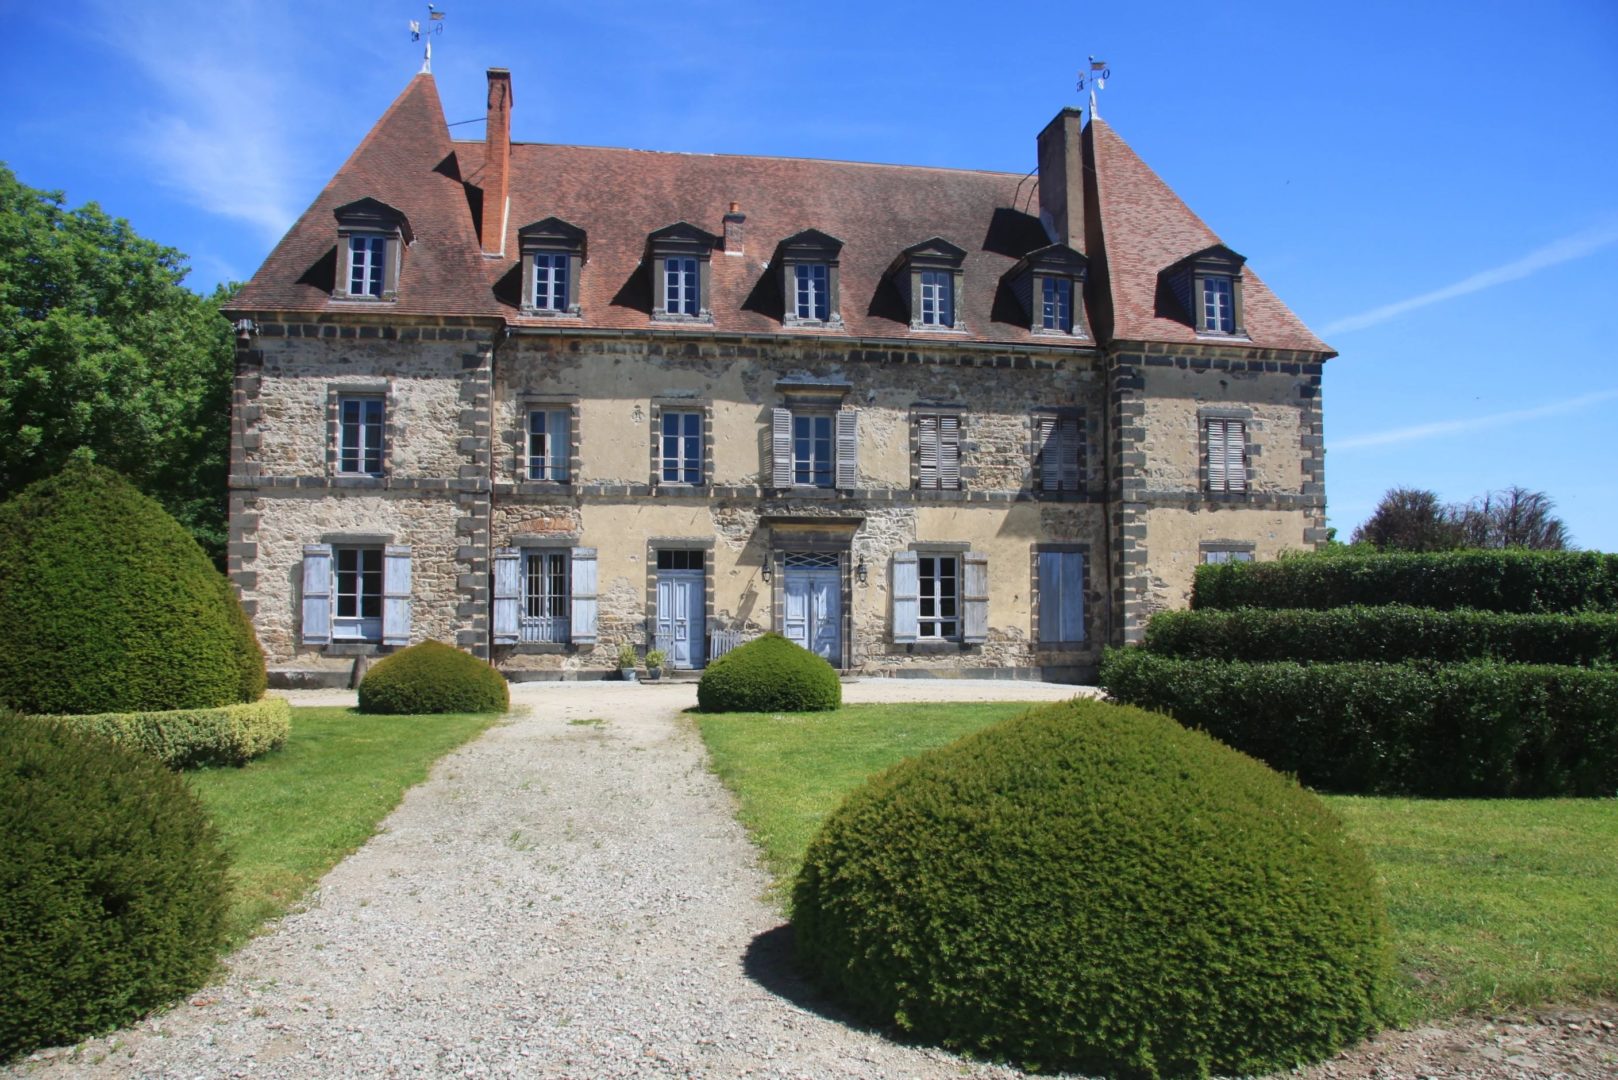 AUTHENTIC 18TH CHATEAU AND ITS OUTBUILDINGS ON 1.4HA - 19427AU